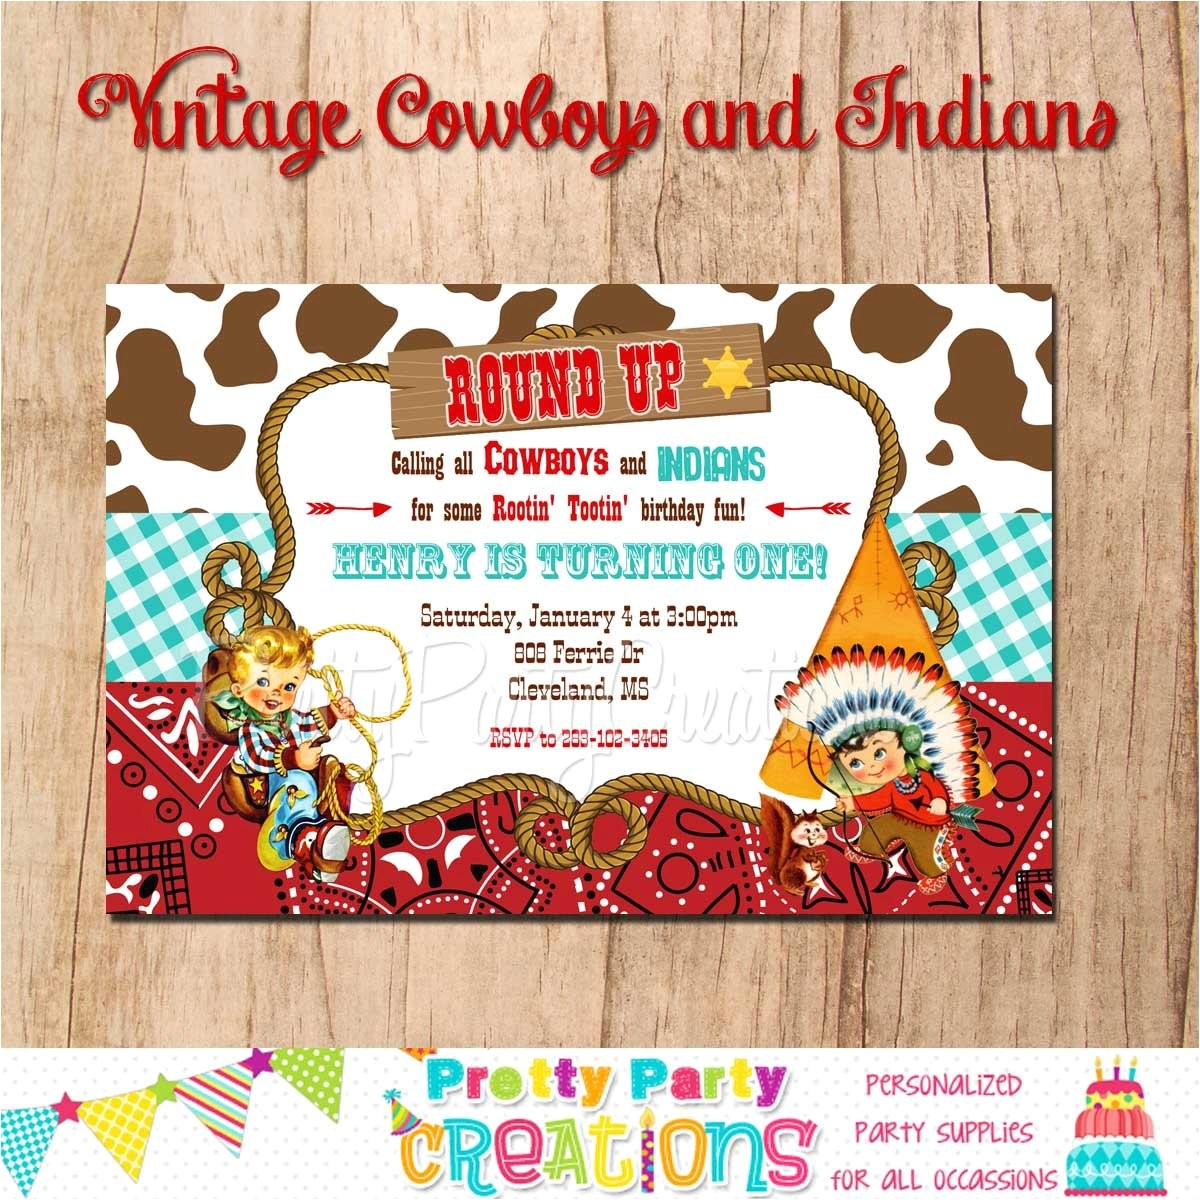 Cowboy and Indian Party Invitations Cowboys and Indians Vintage Inspired Invitation You Print